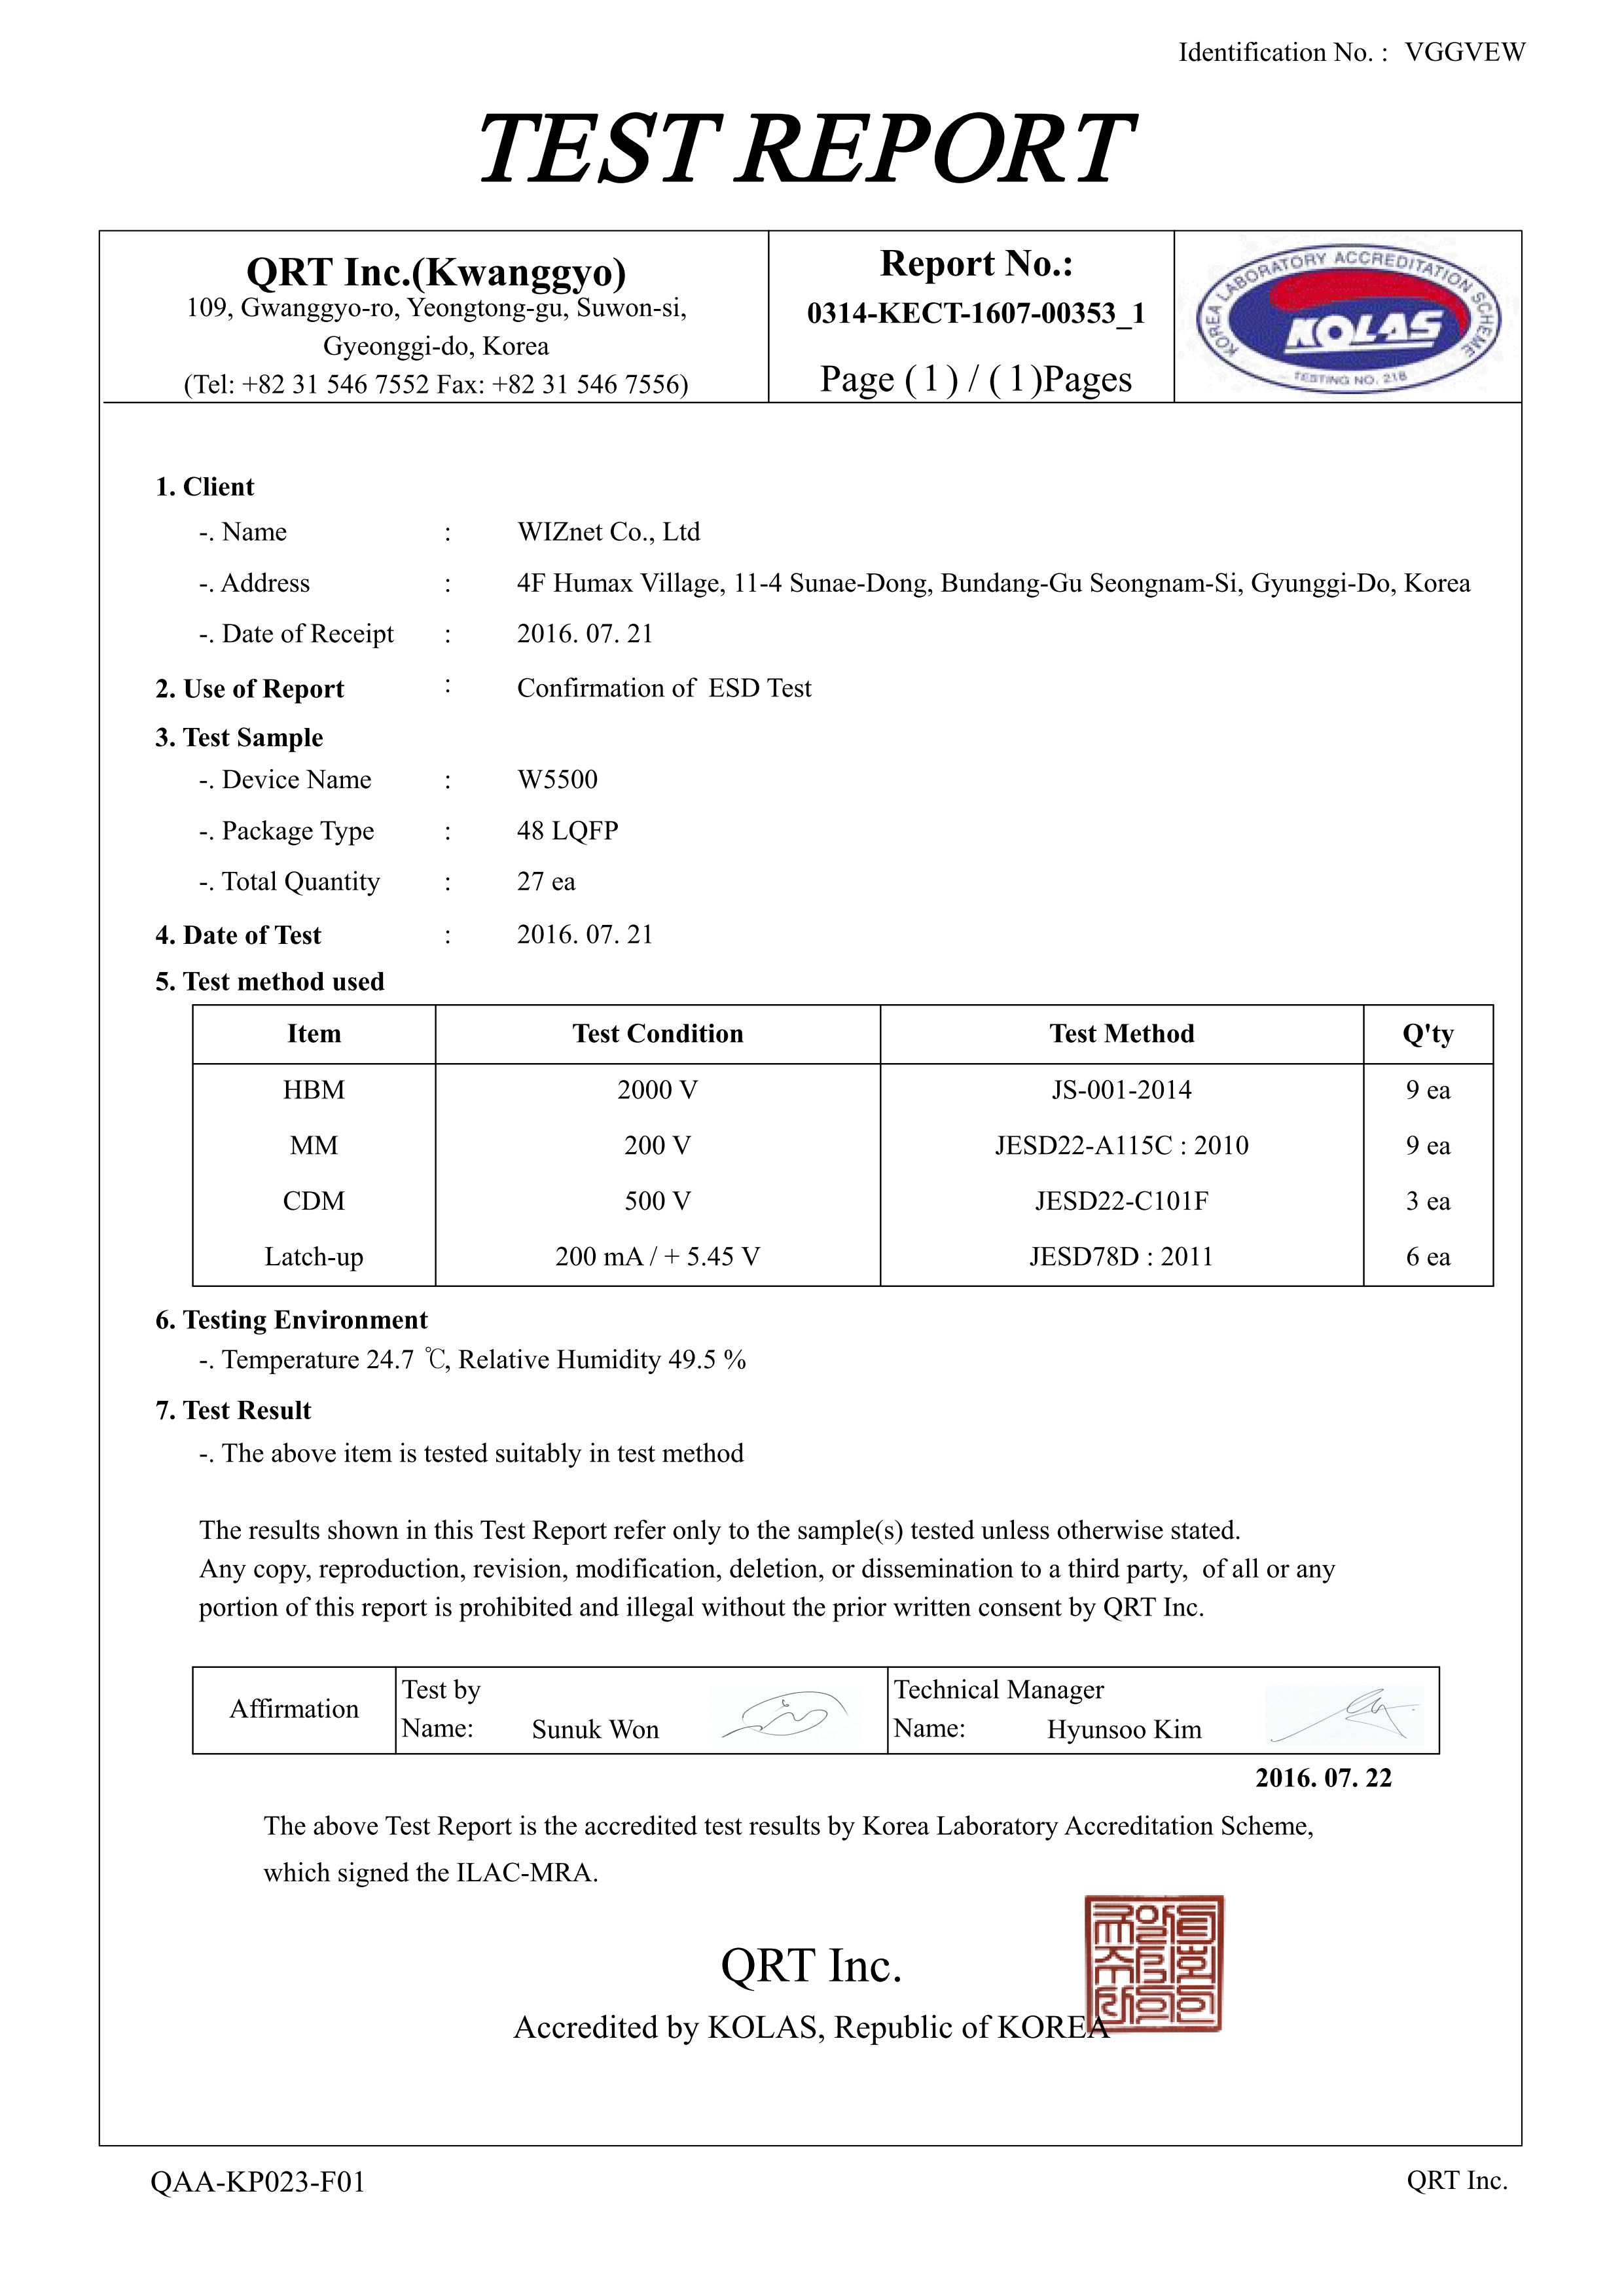 W5500 Confirmation of ESD Test document